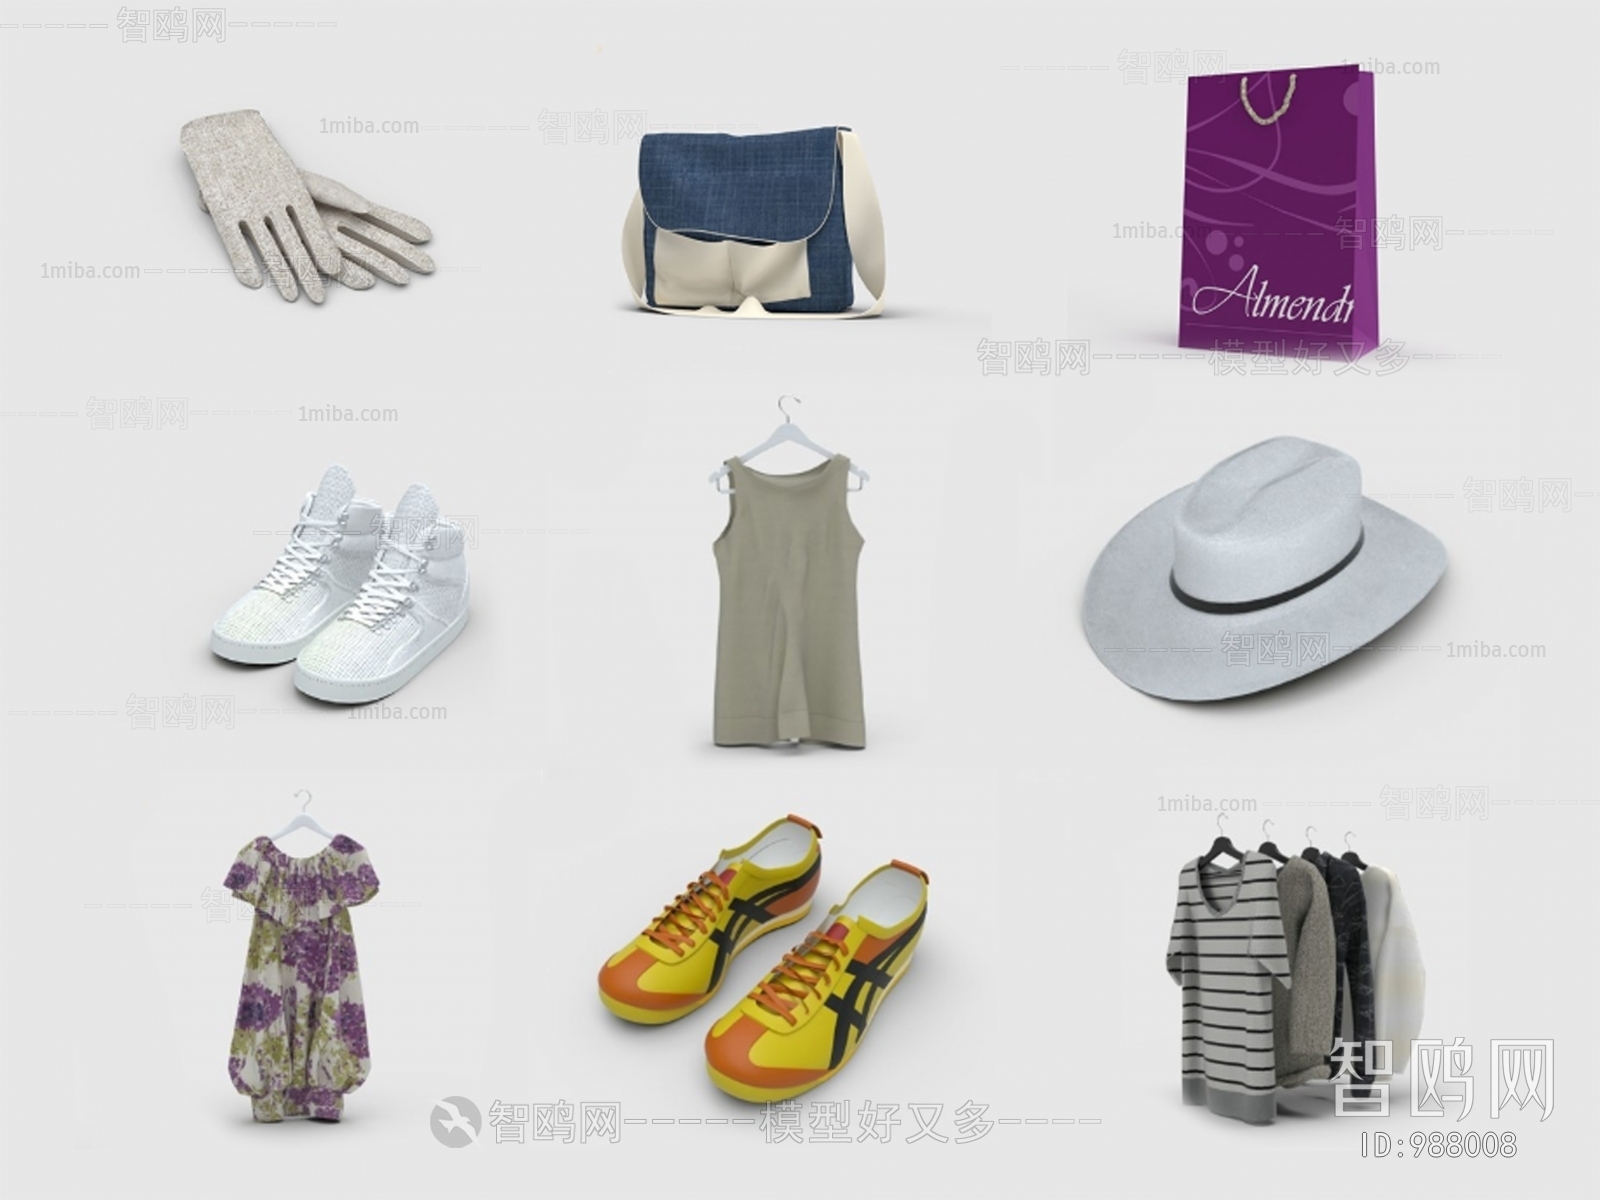 Modern Clothes, Bags And Shoes